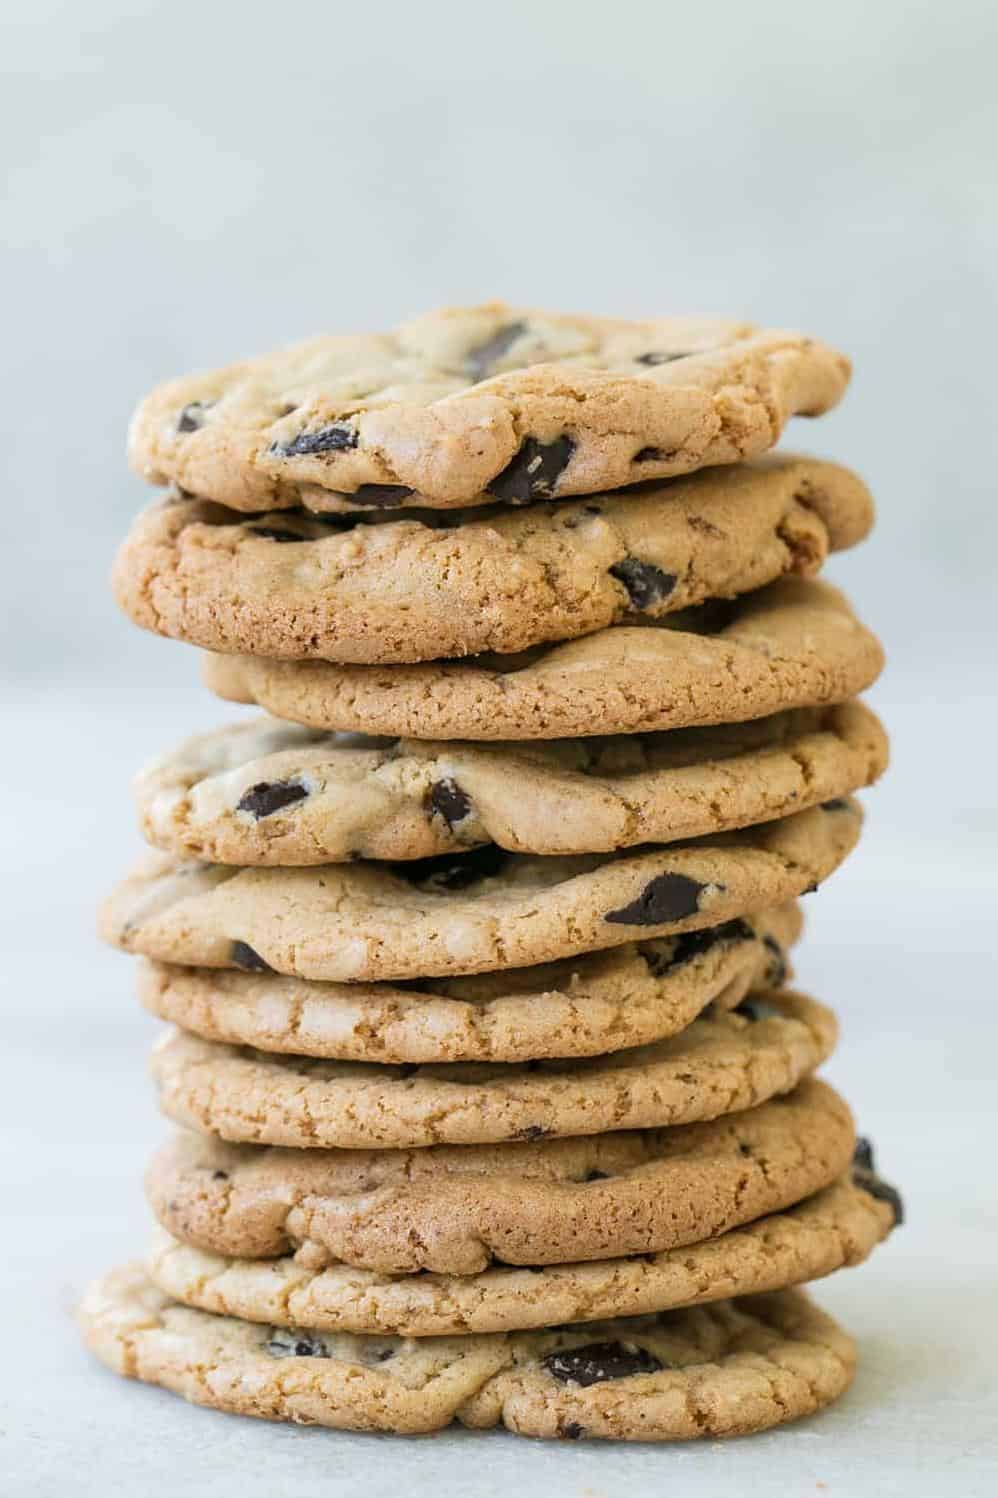  Non-dairy, non-butter and non-greasy yet still super tasty cookies!